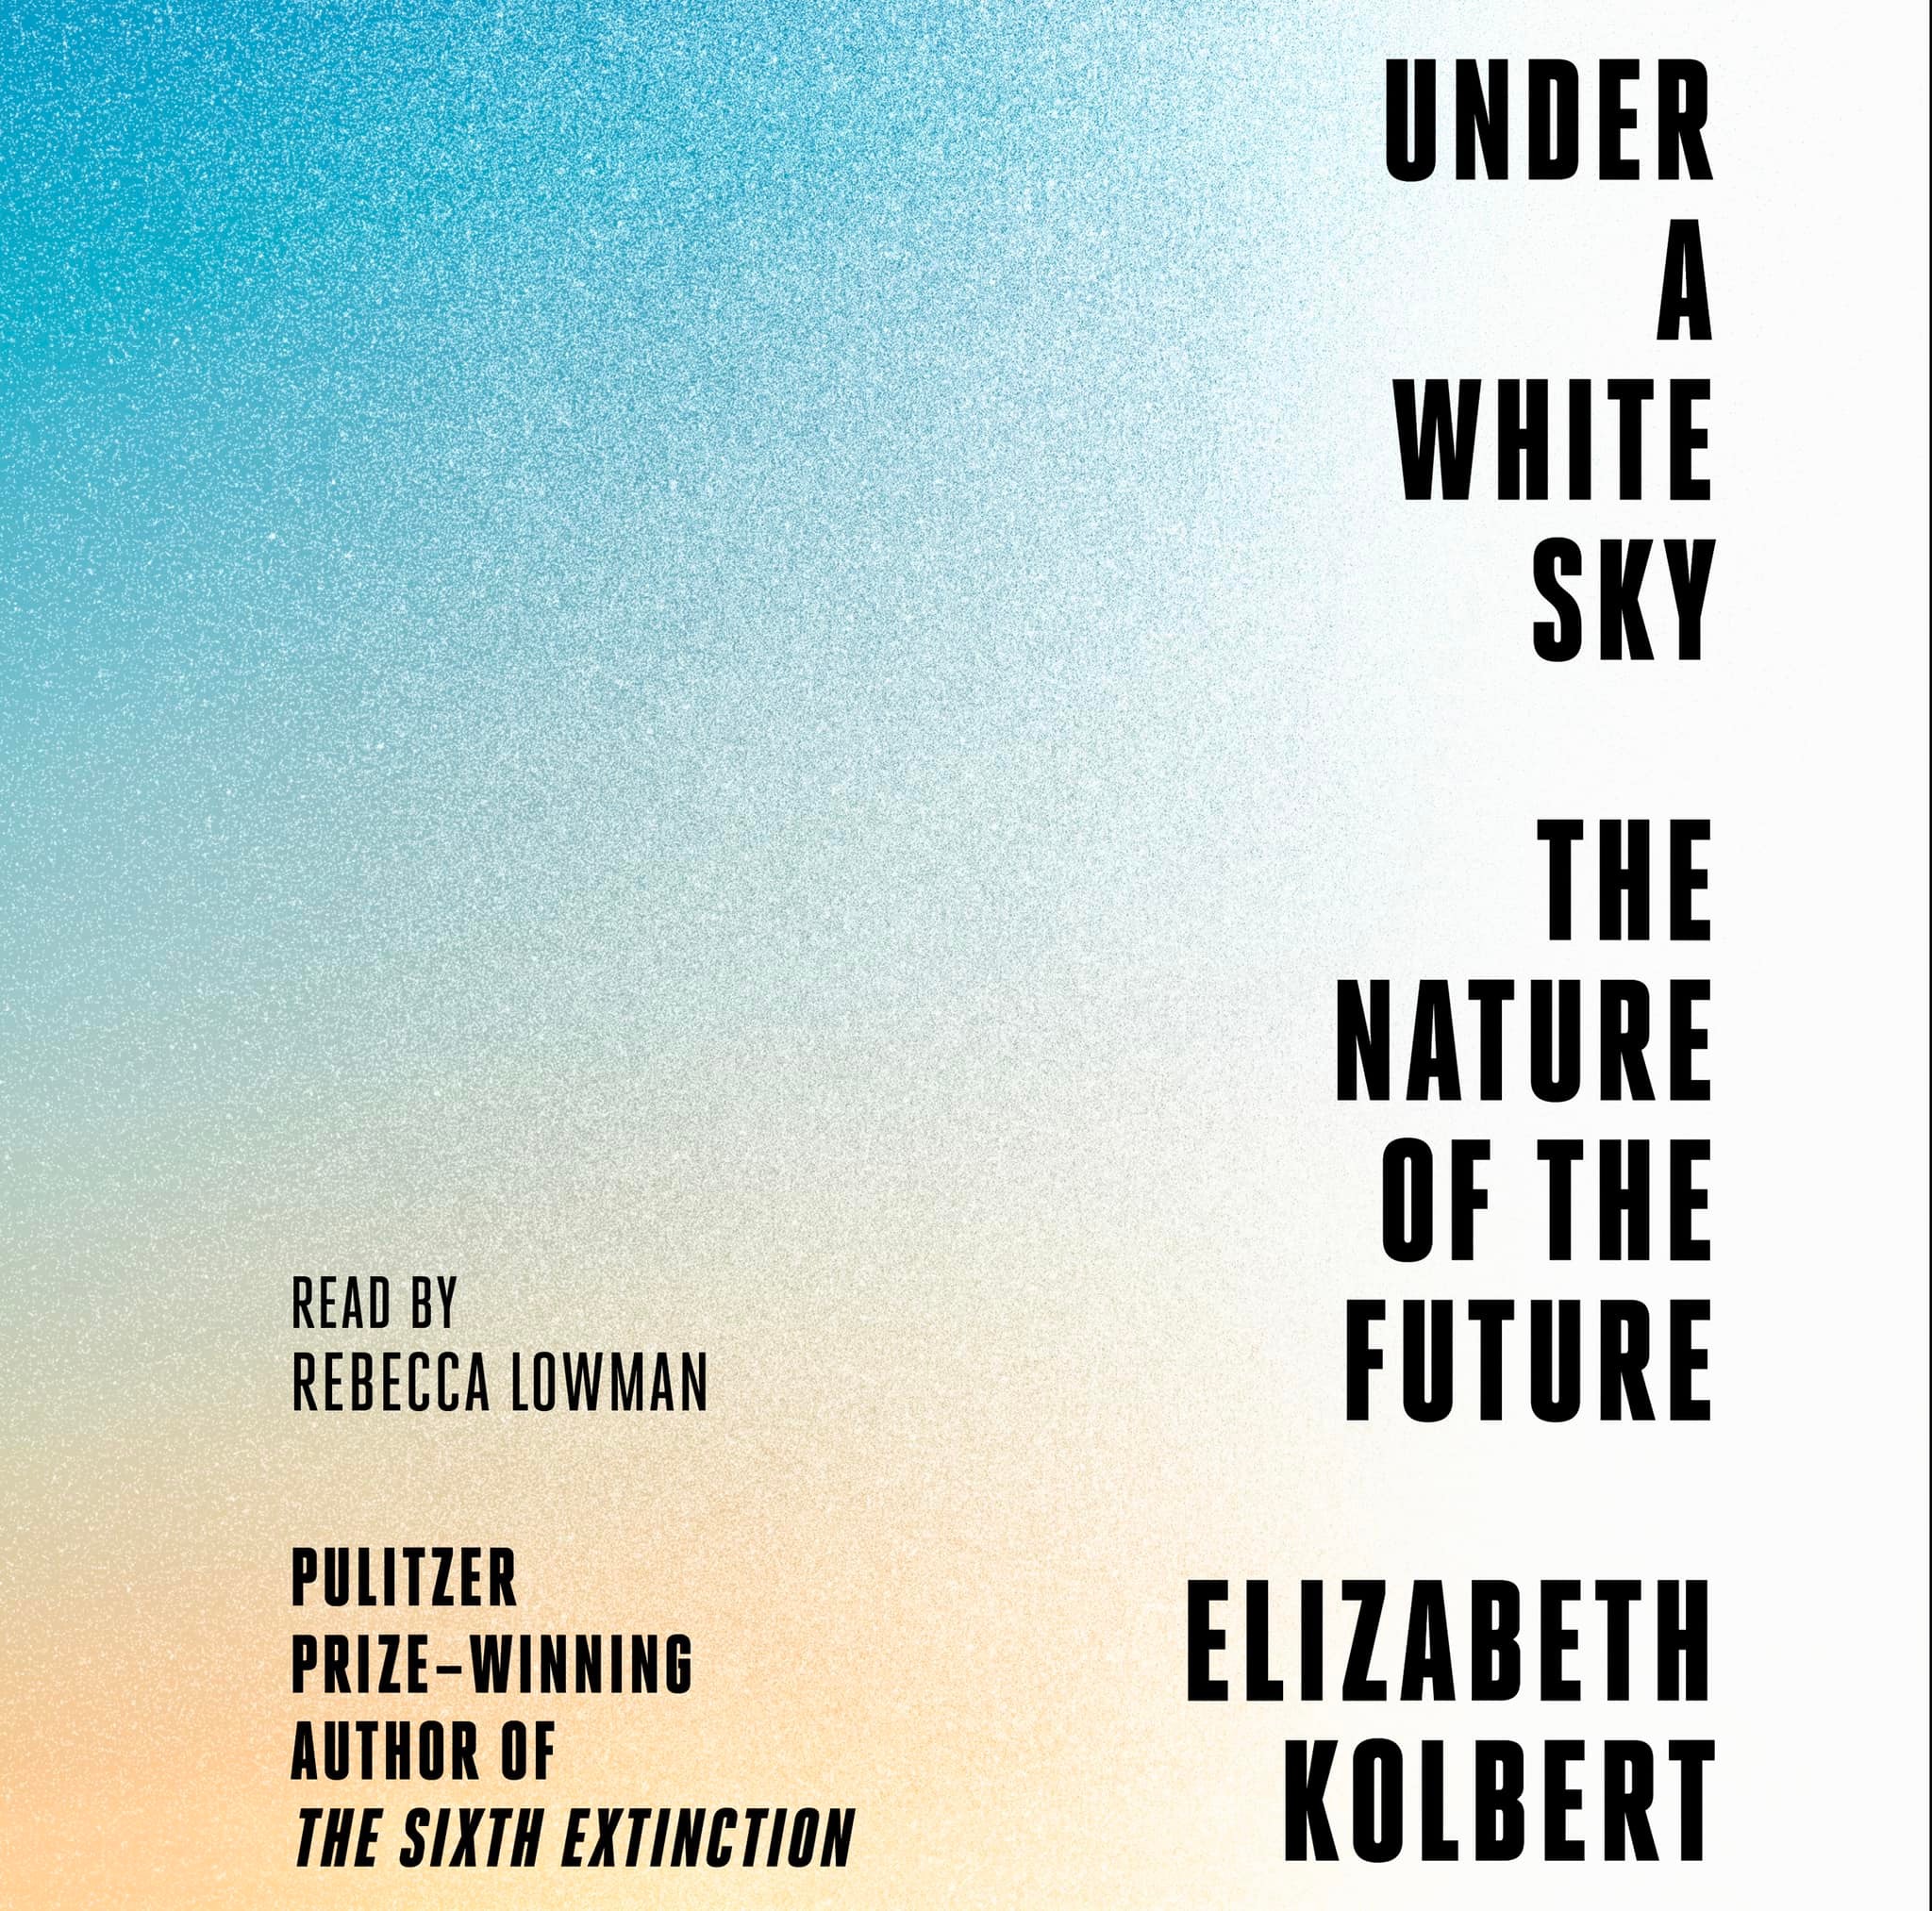 Tonight's book talk by Elizabeth Kolbert: Cover image for the book